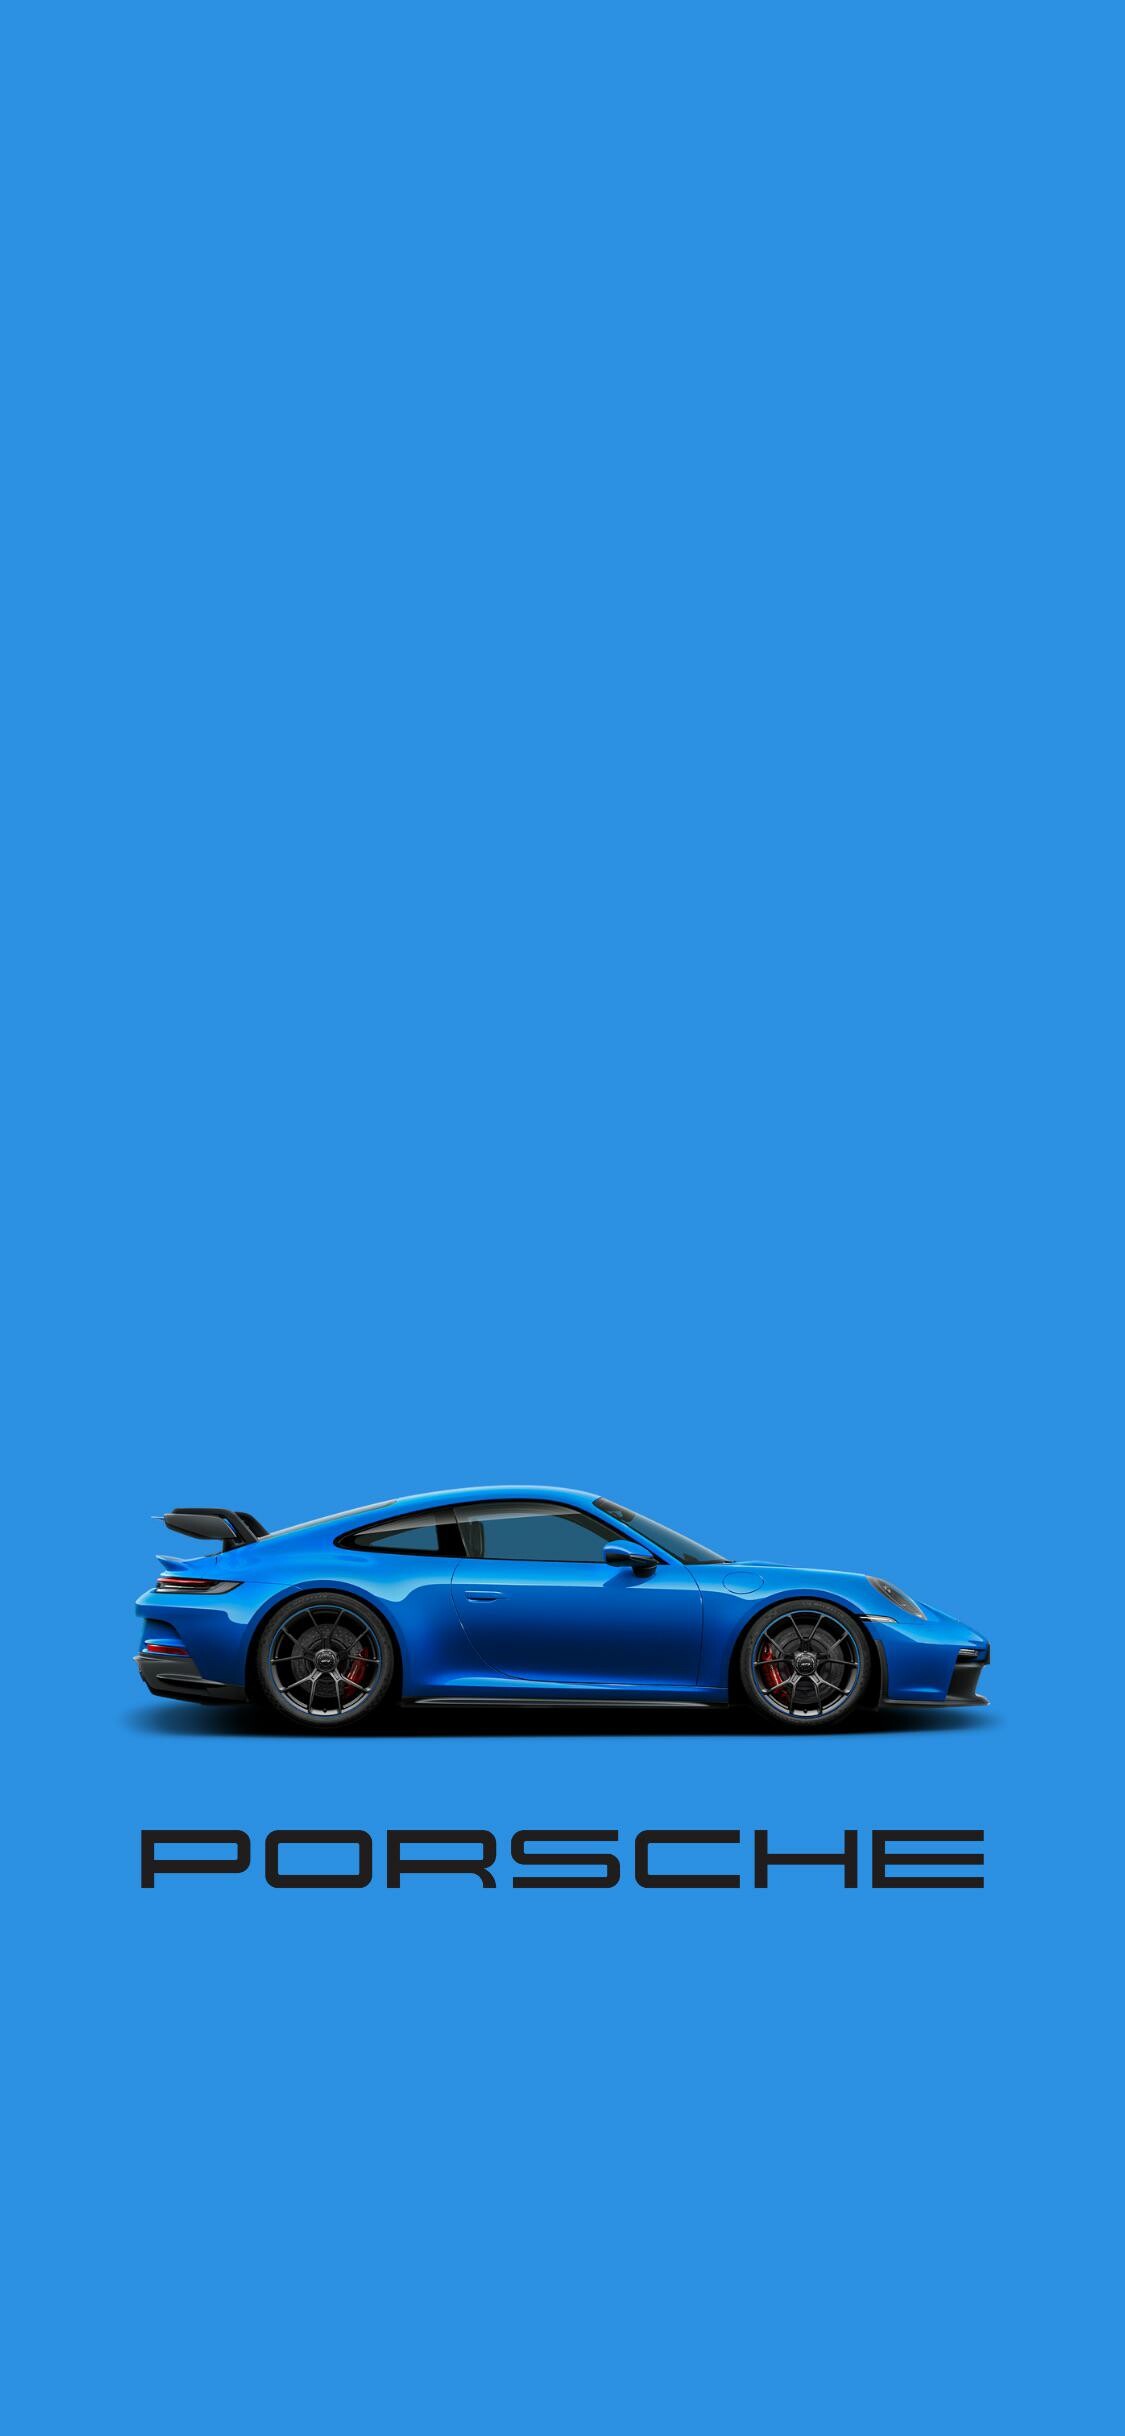 Porsche: The Stuttgart-Zuffenhausen-based automaker is not a company adverse to change, however, and through the years it expanded its mainstream vehicle lineup to include entry-level mid-engined and front-engined sports cars. 1130x2440 HD Background.